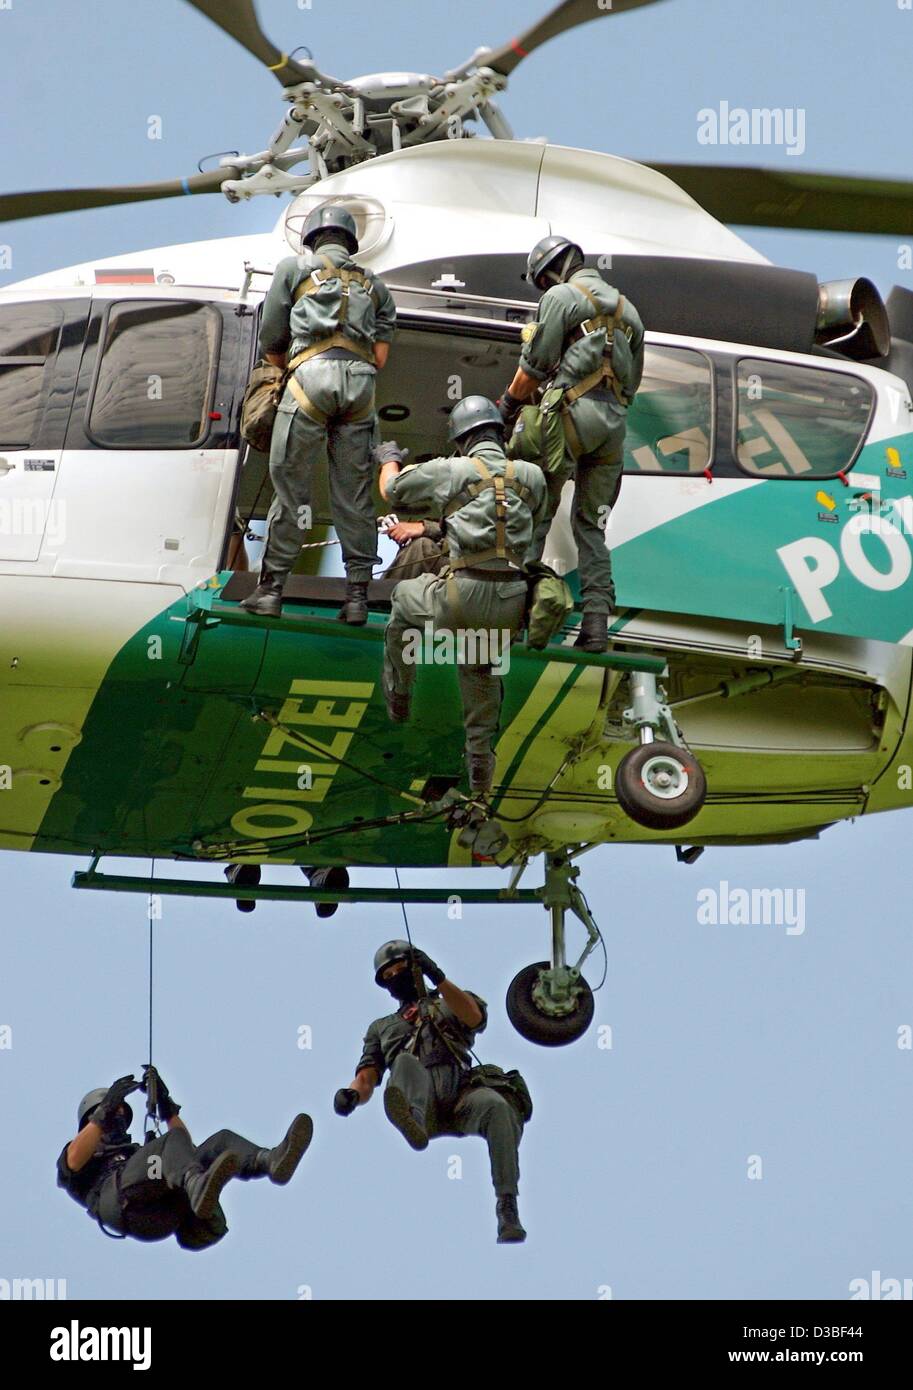 (dpa) - Members of the police special forces (SEK) abseil themselves from an air borne Eurocopter of the type EC-155 during a police exercise near Deggingen, 25 June 2003. Pilots and training units of the police and of the SEK (Sondereinsatzkommando) took part in these exercises. Stock Photo